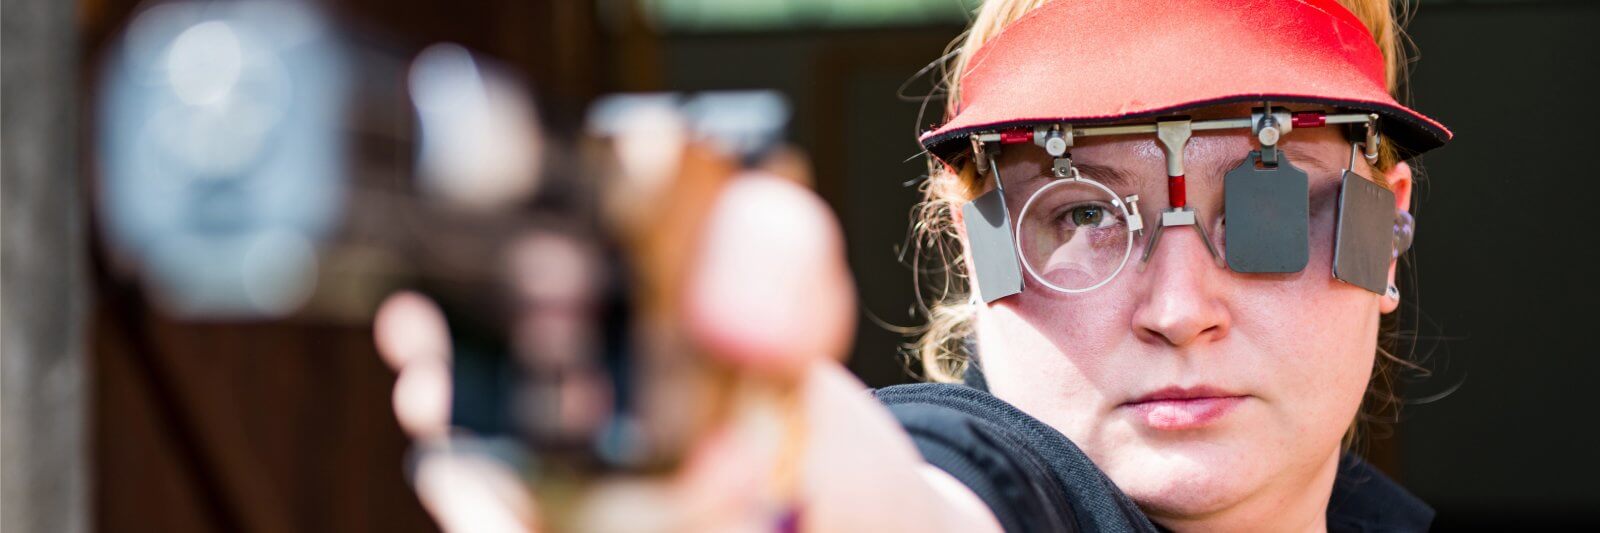 Woman aims her pistol with eye patch and visor during competition